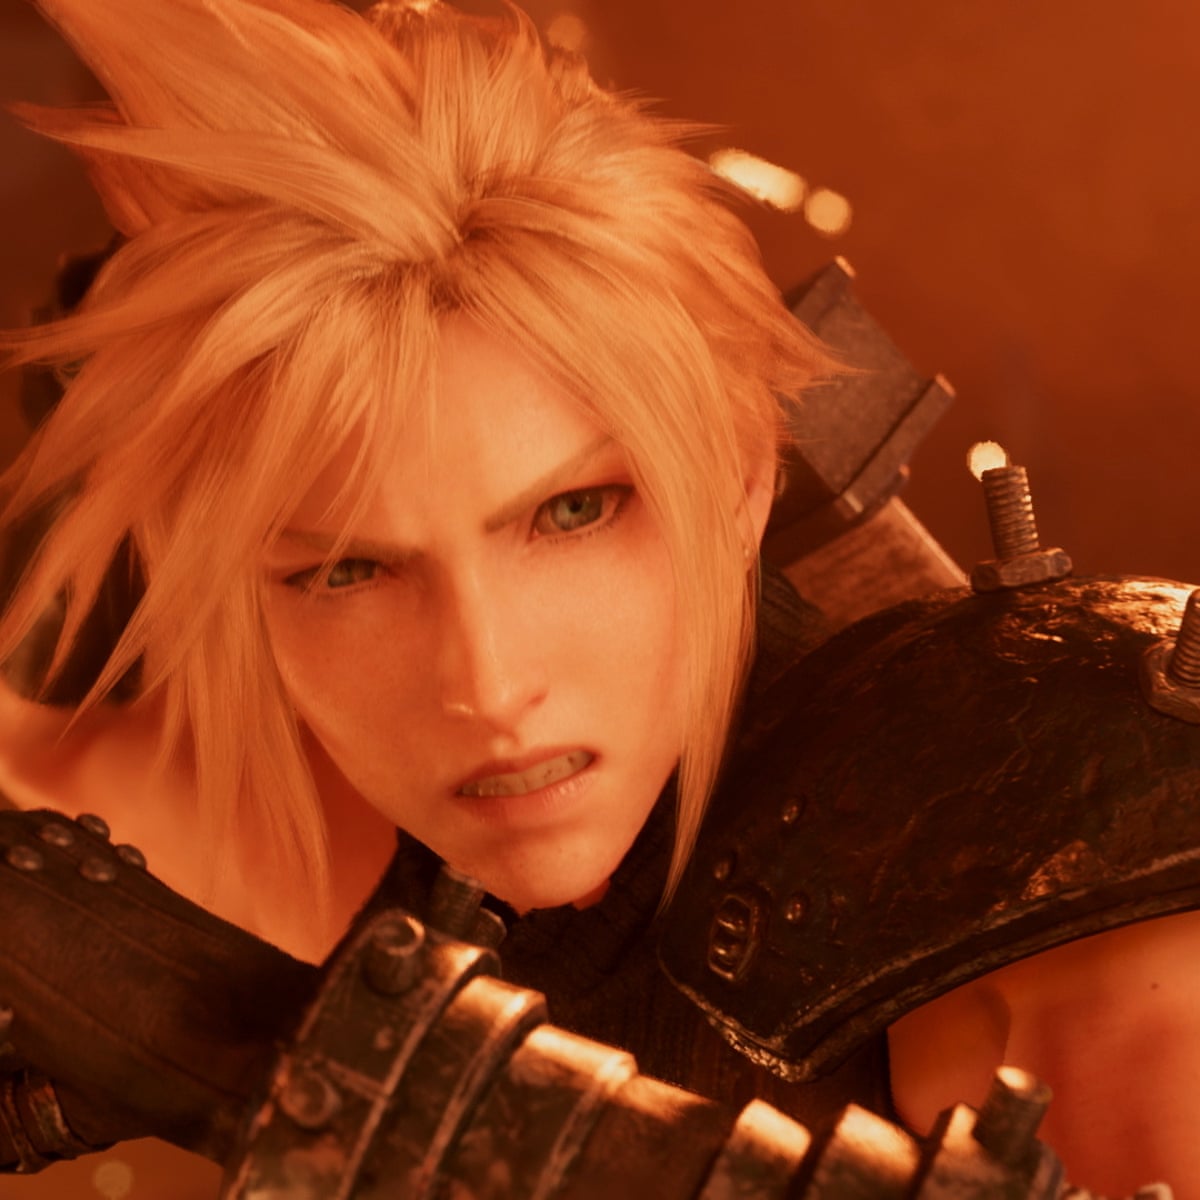 Final Fantasy VII Remake: How Long To Finish The Game?